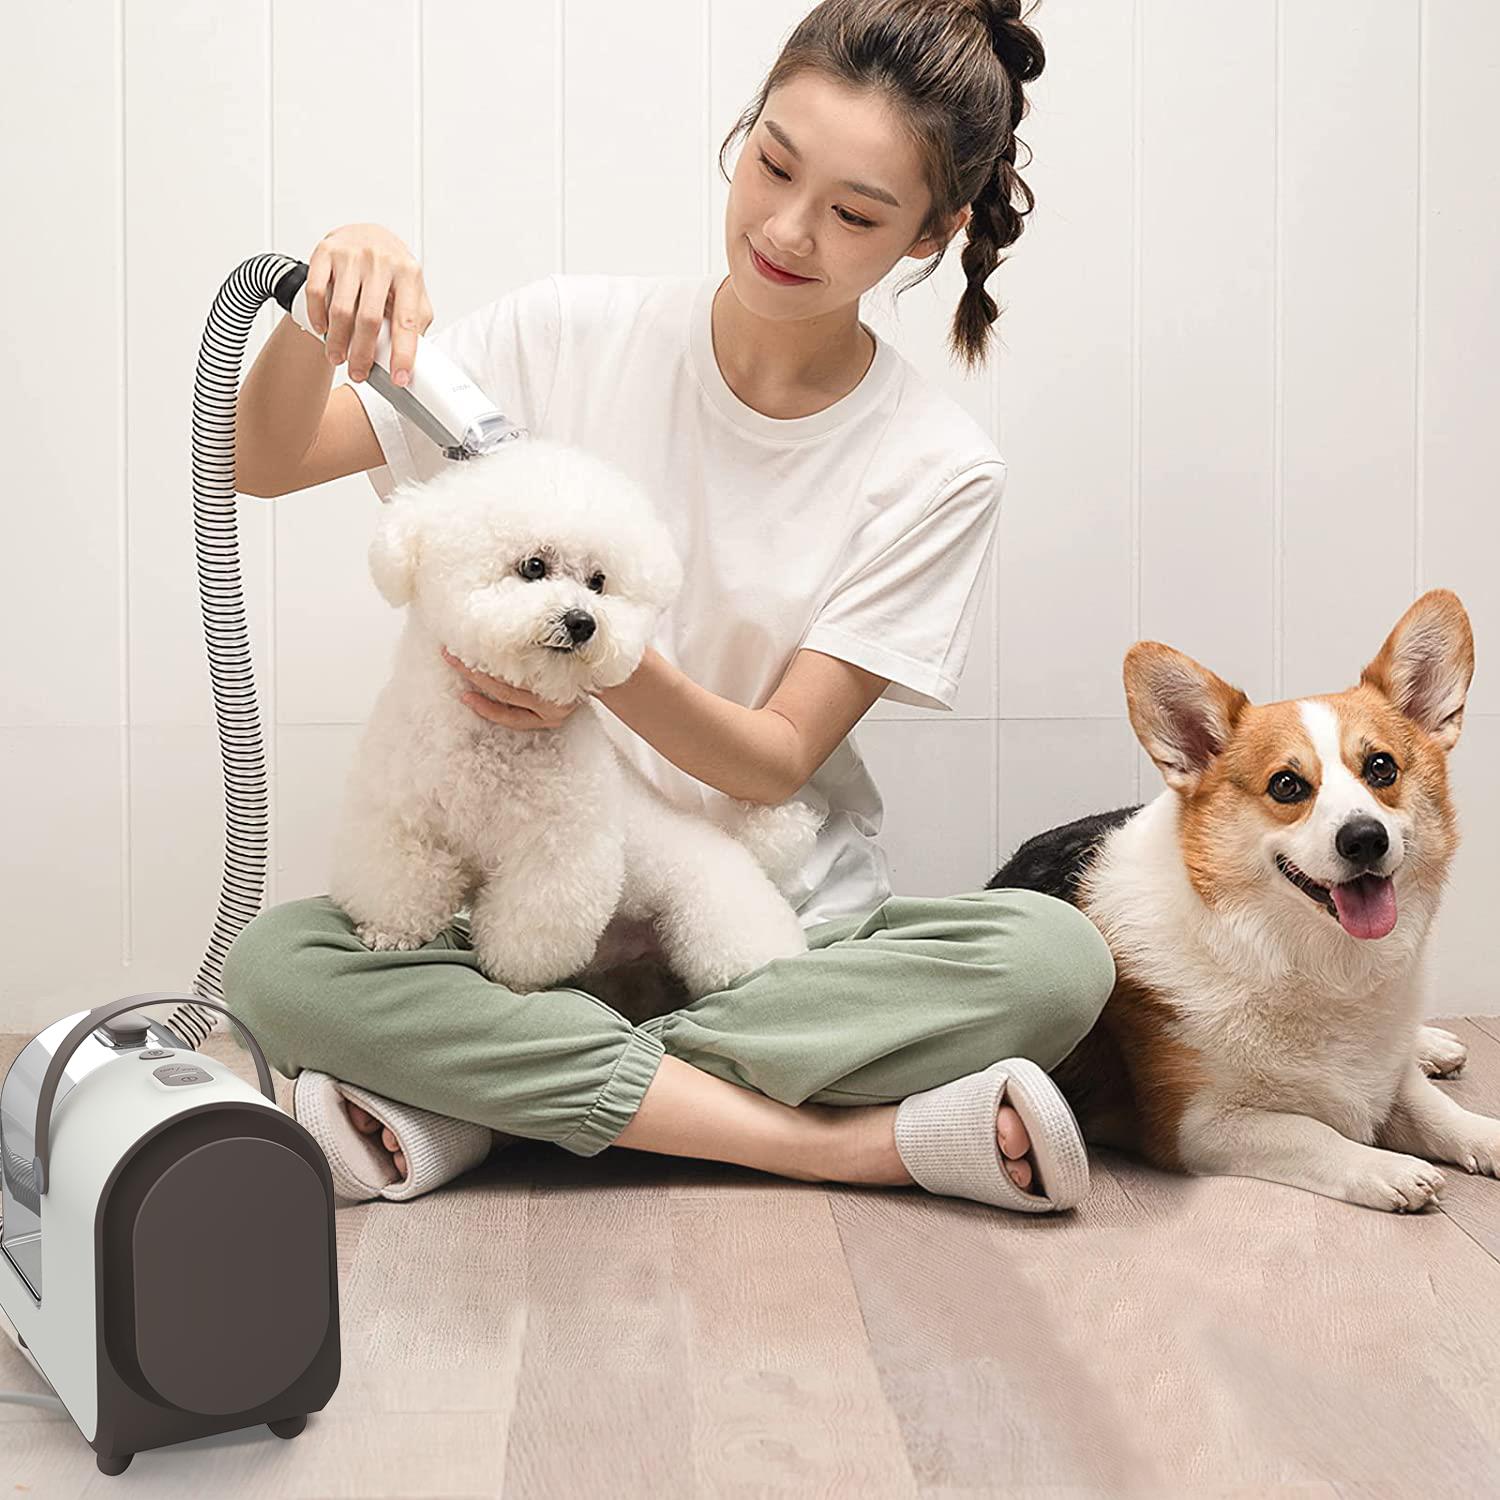 400 W Super Silent Pet Grooming Vacuum Set for Dog and Cat 